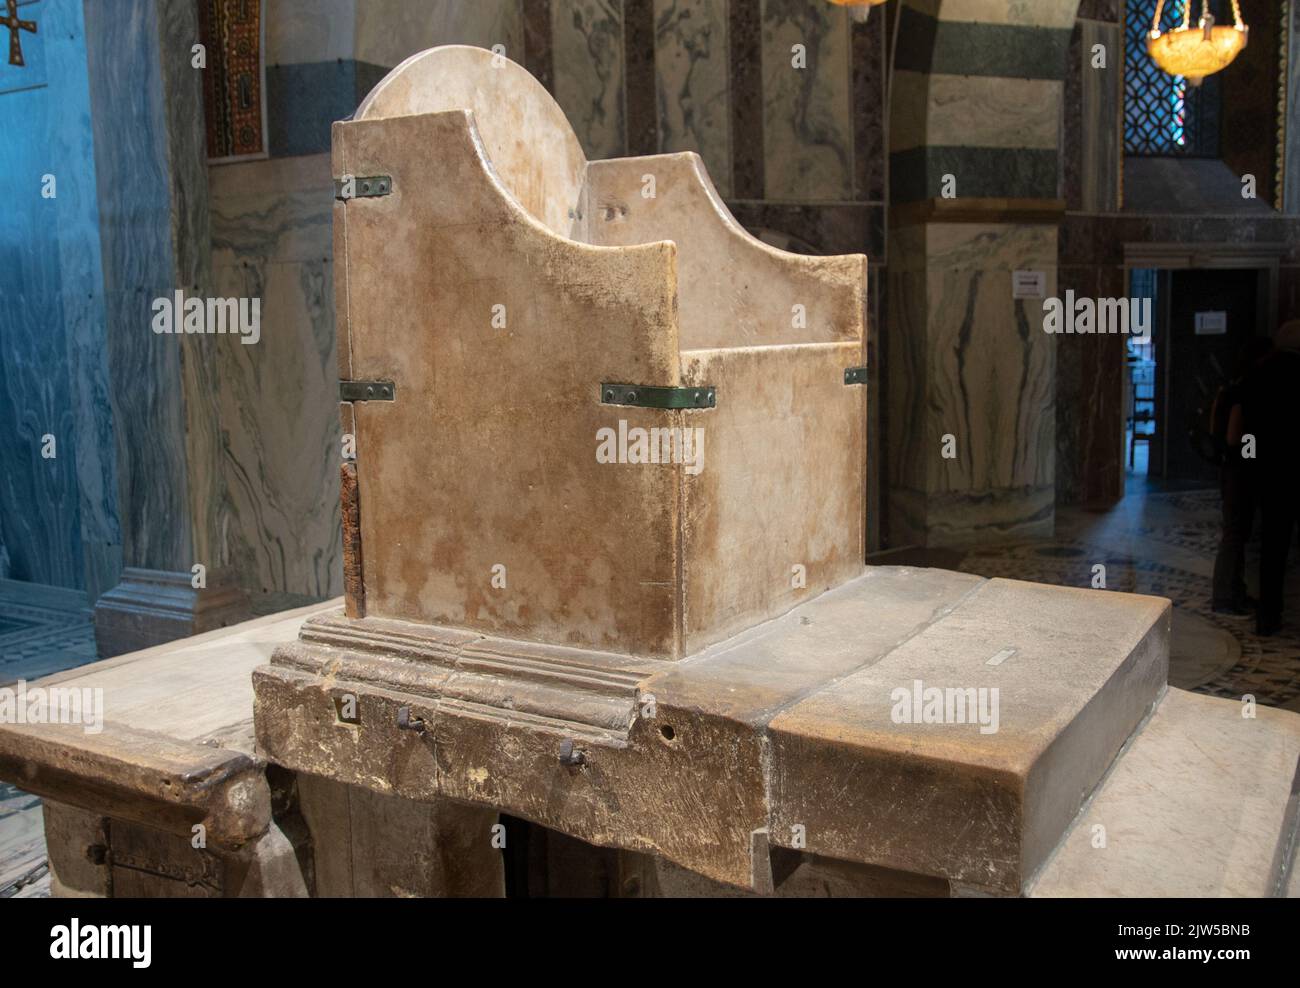 The Aachen royal throne, also known as the throne of Charlemagne, is a throne erected in the 790s on behalf of Emperor Charlemagne, which forms the Stock Photo